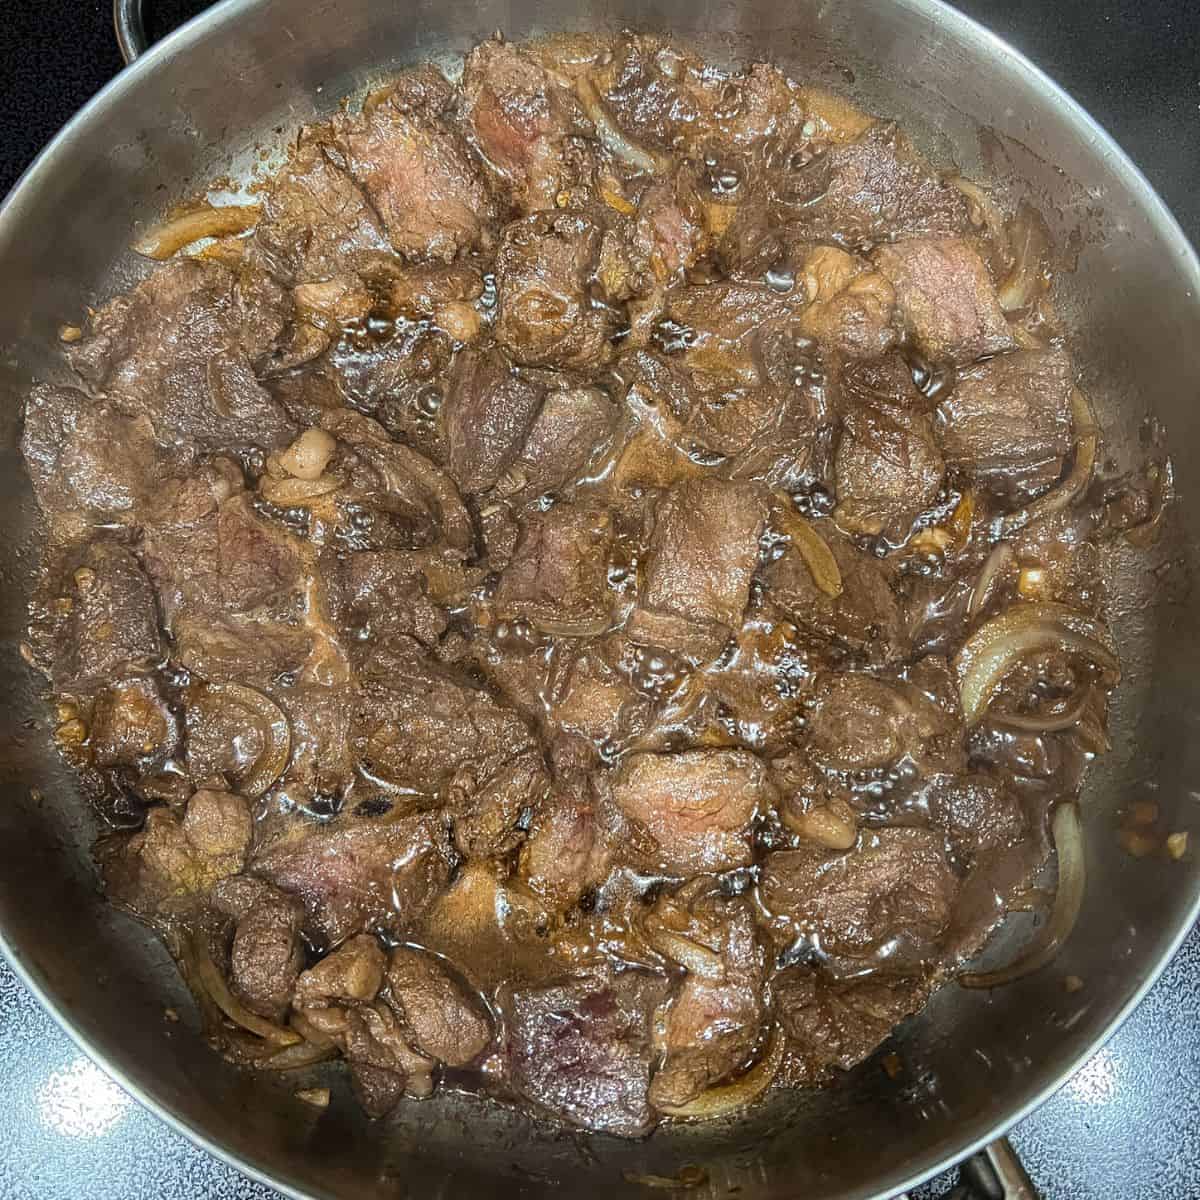 Sautee onion and garlic then add beef and cook.